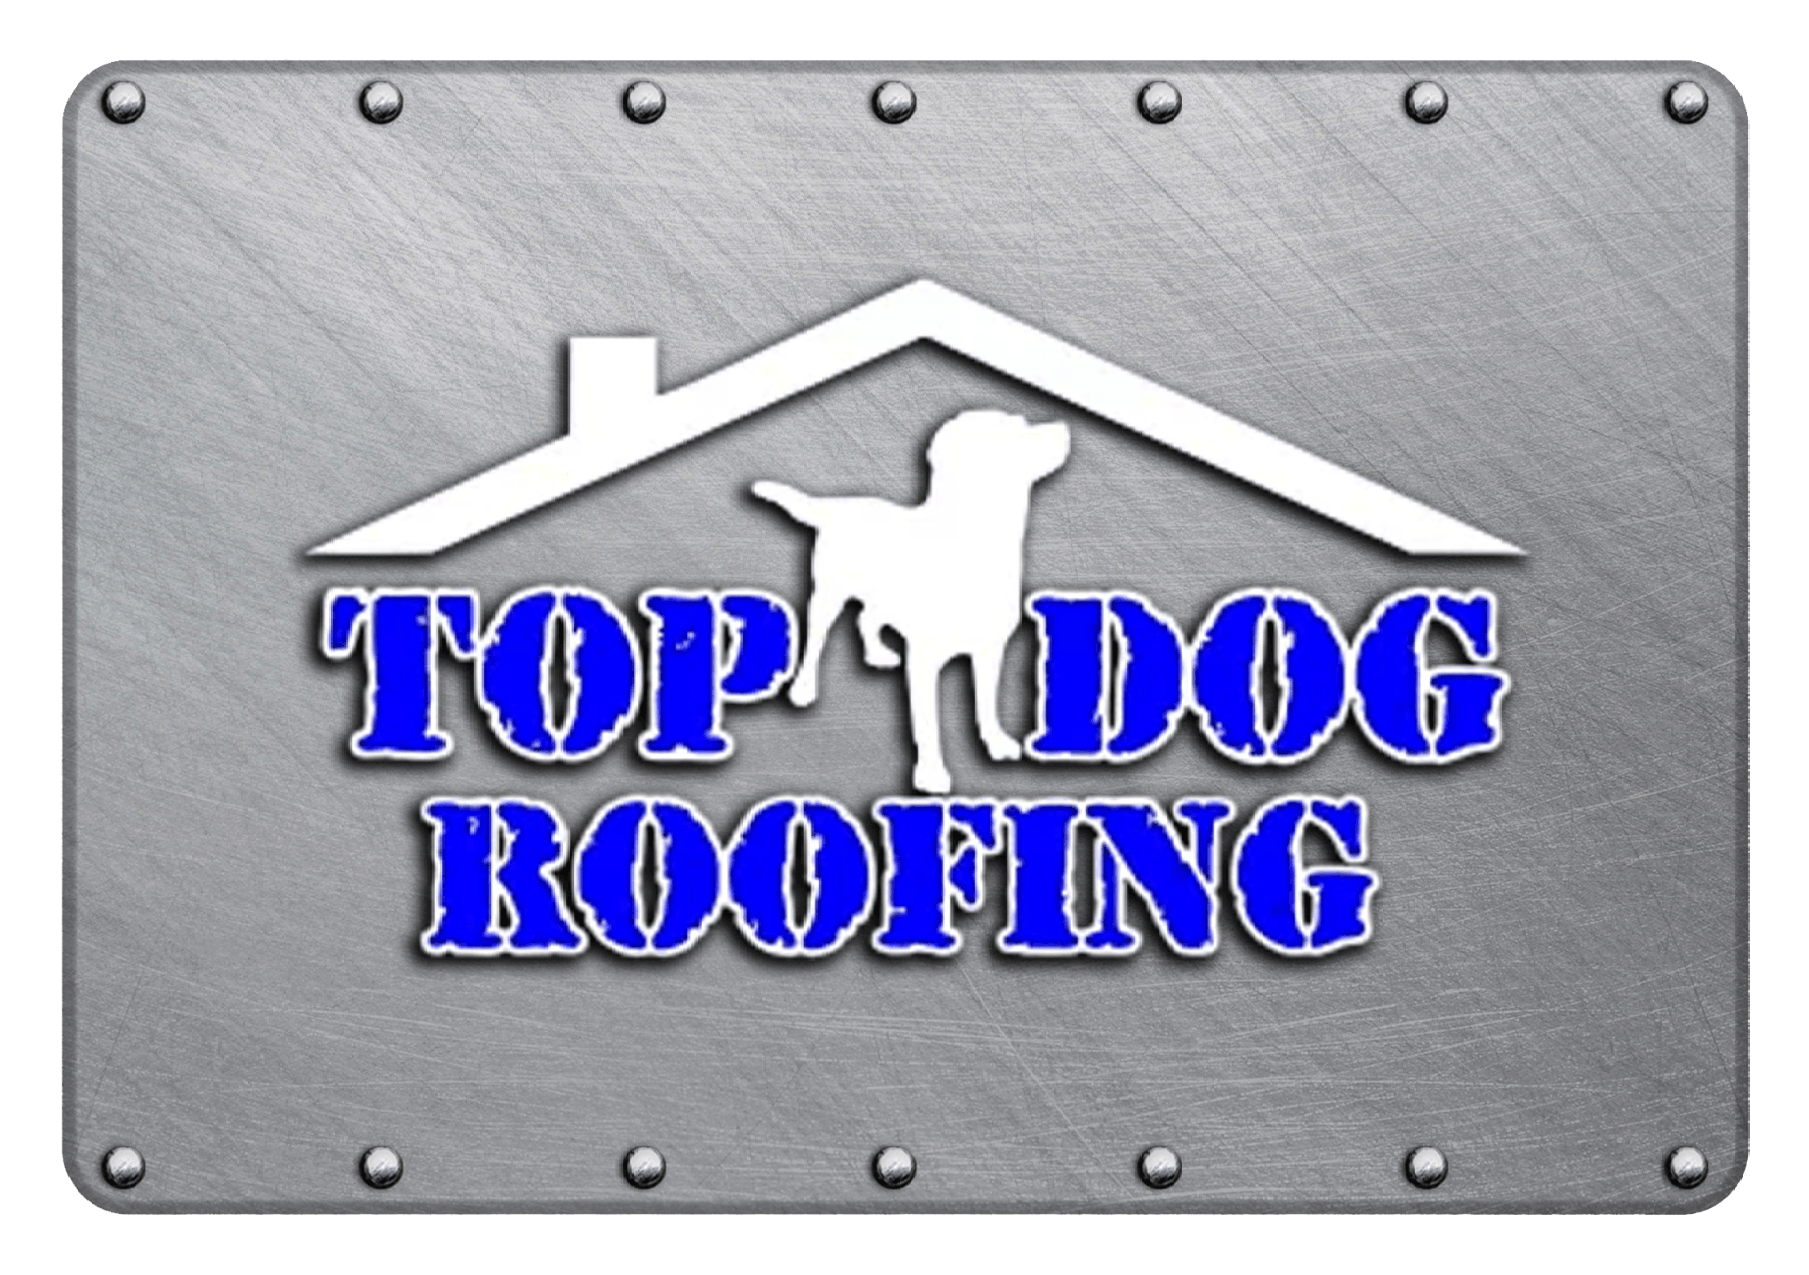 YOUR PREMIER ROOFER TEXAS Dog Roofing